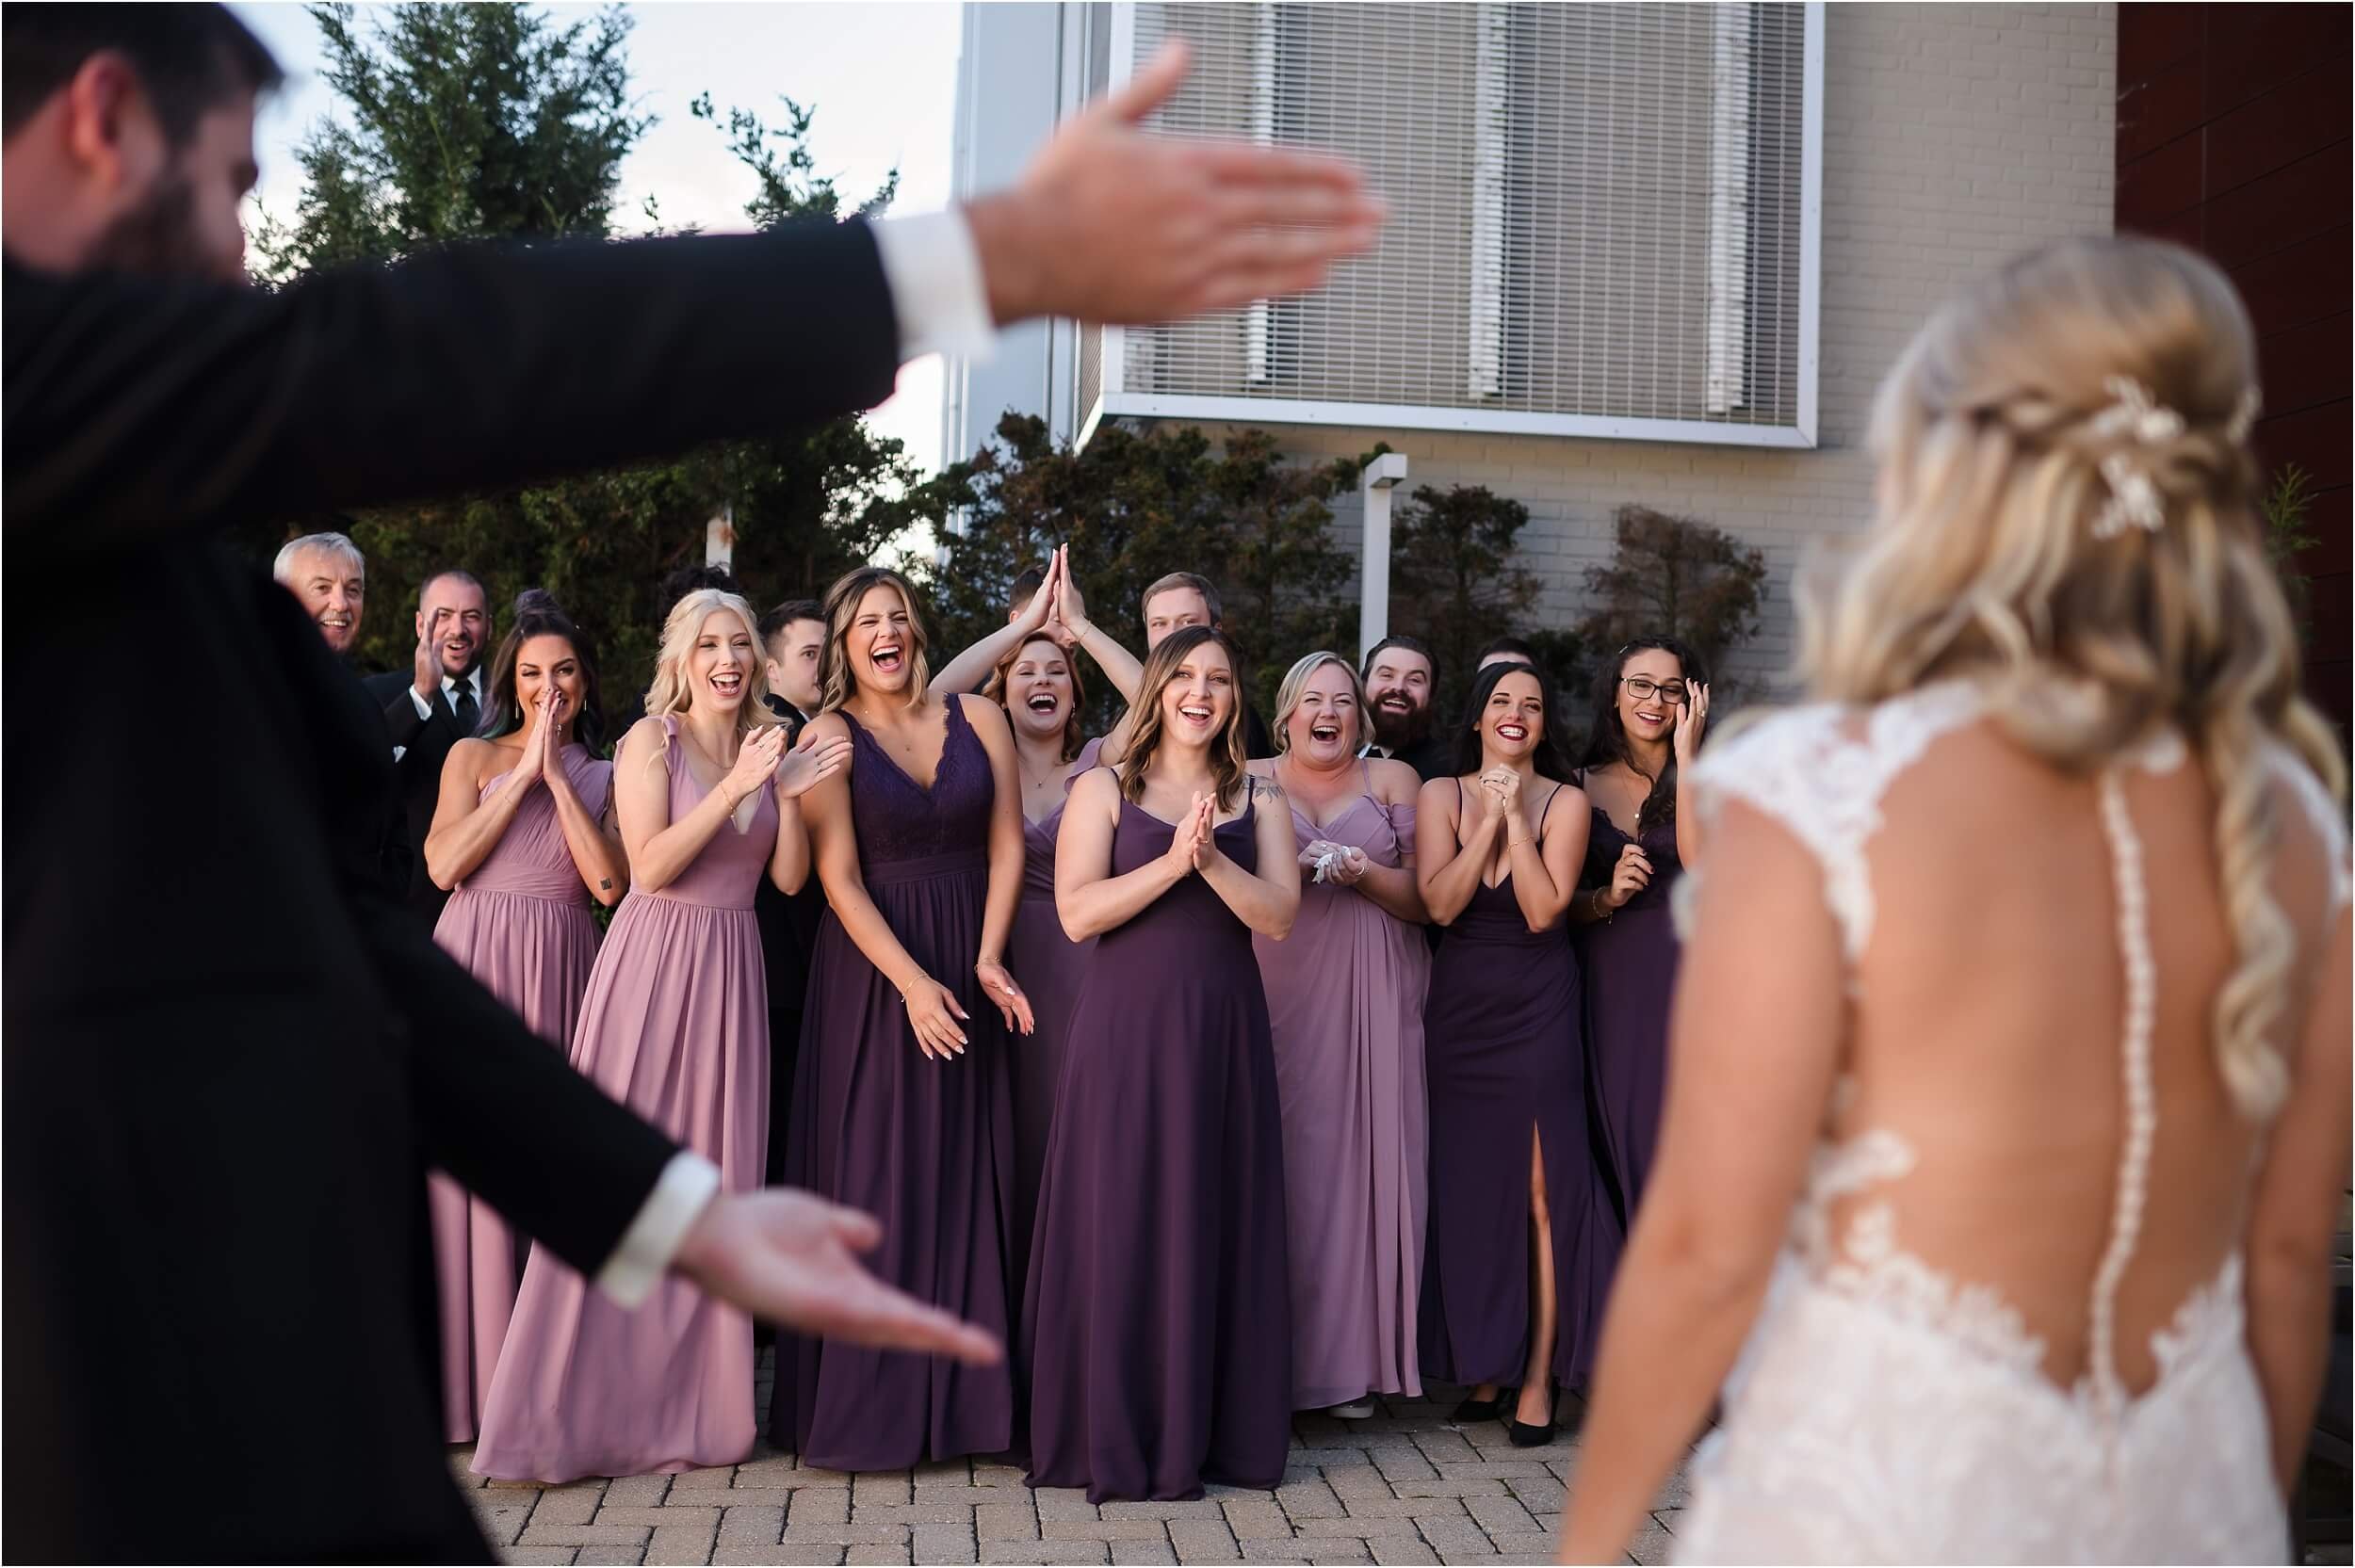  Bridesmaids wearing pink and purple dresses react joyfully to their friend who is getting married.  